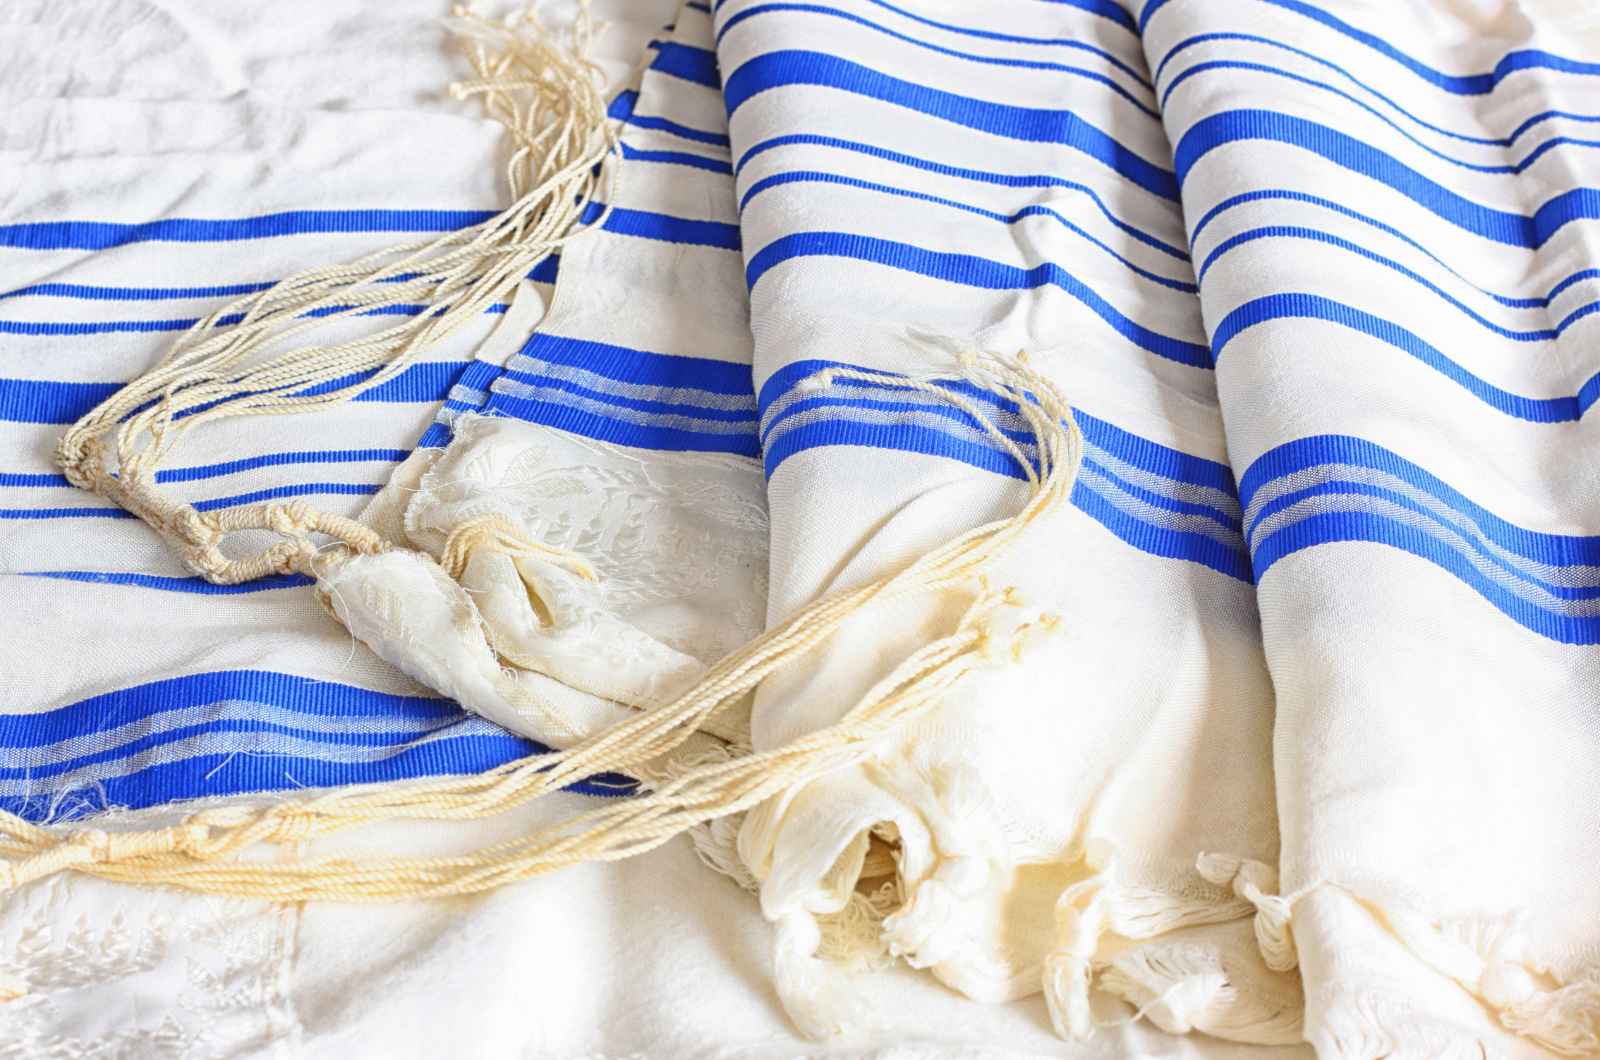 The tallit with tzitzit on the corners comes from the traditional